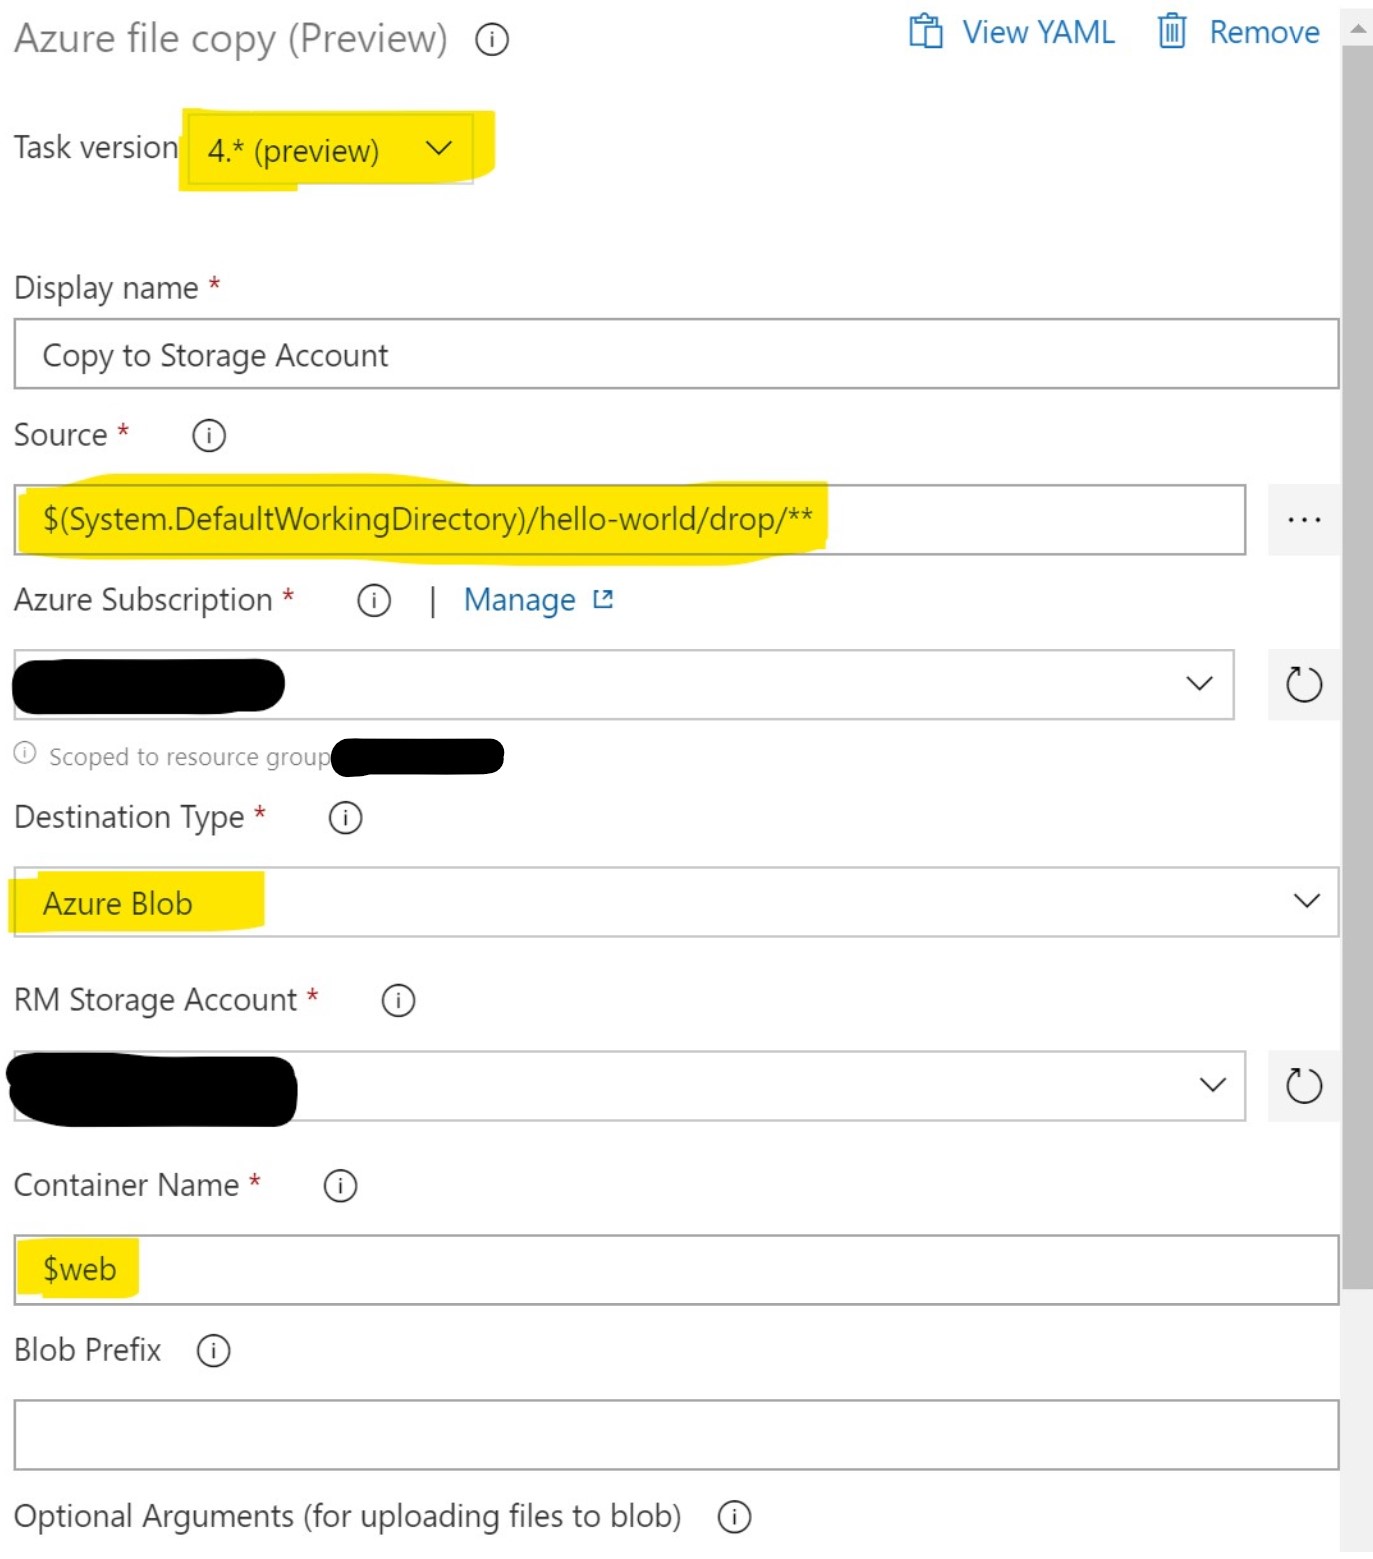 Edit the settings of the Azure file copy task